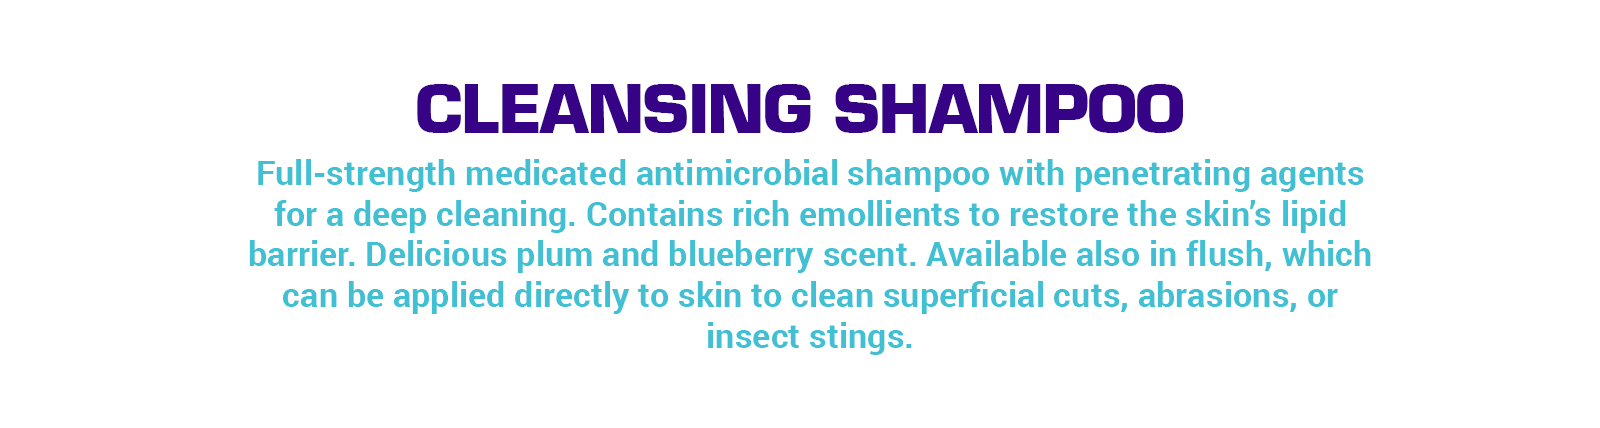 cleansing-shampoo